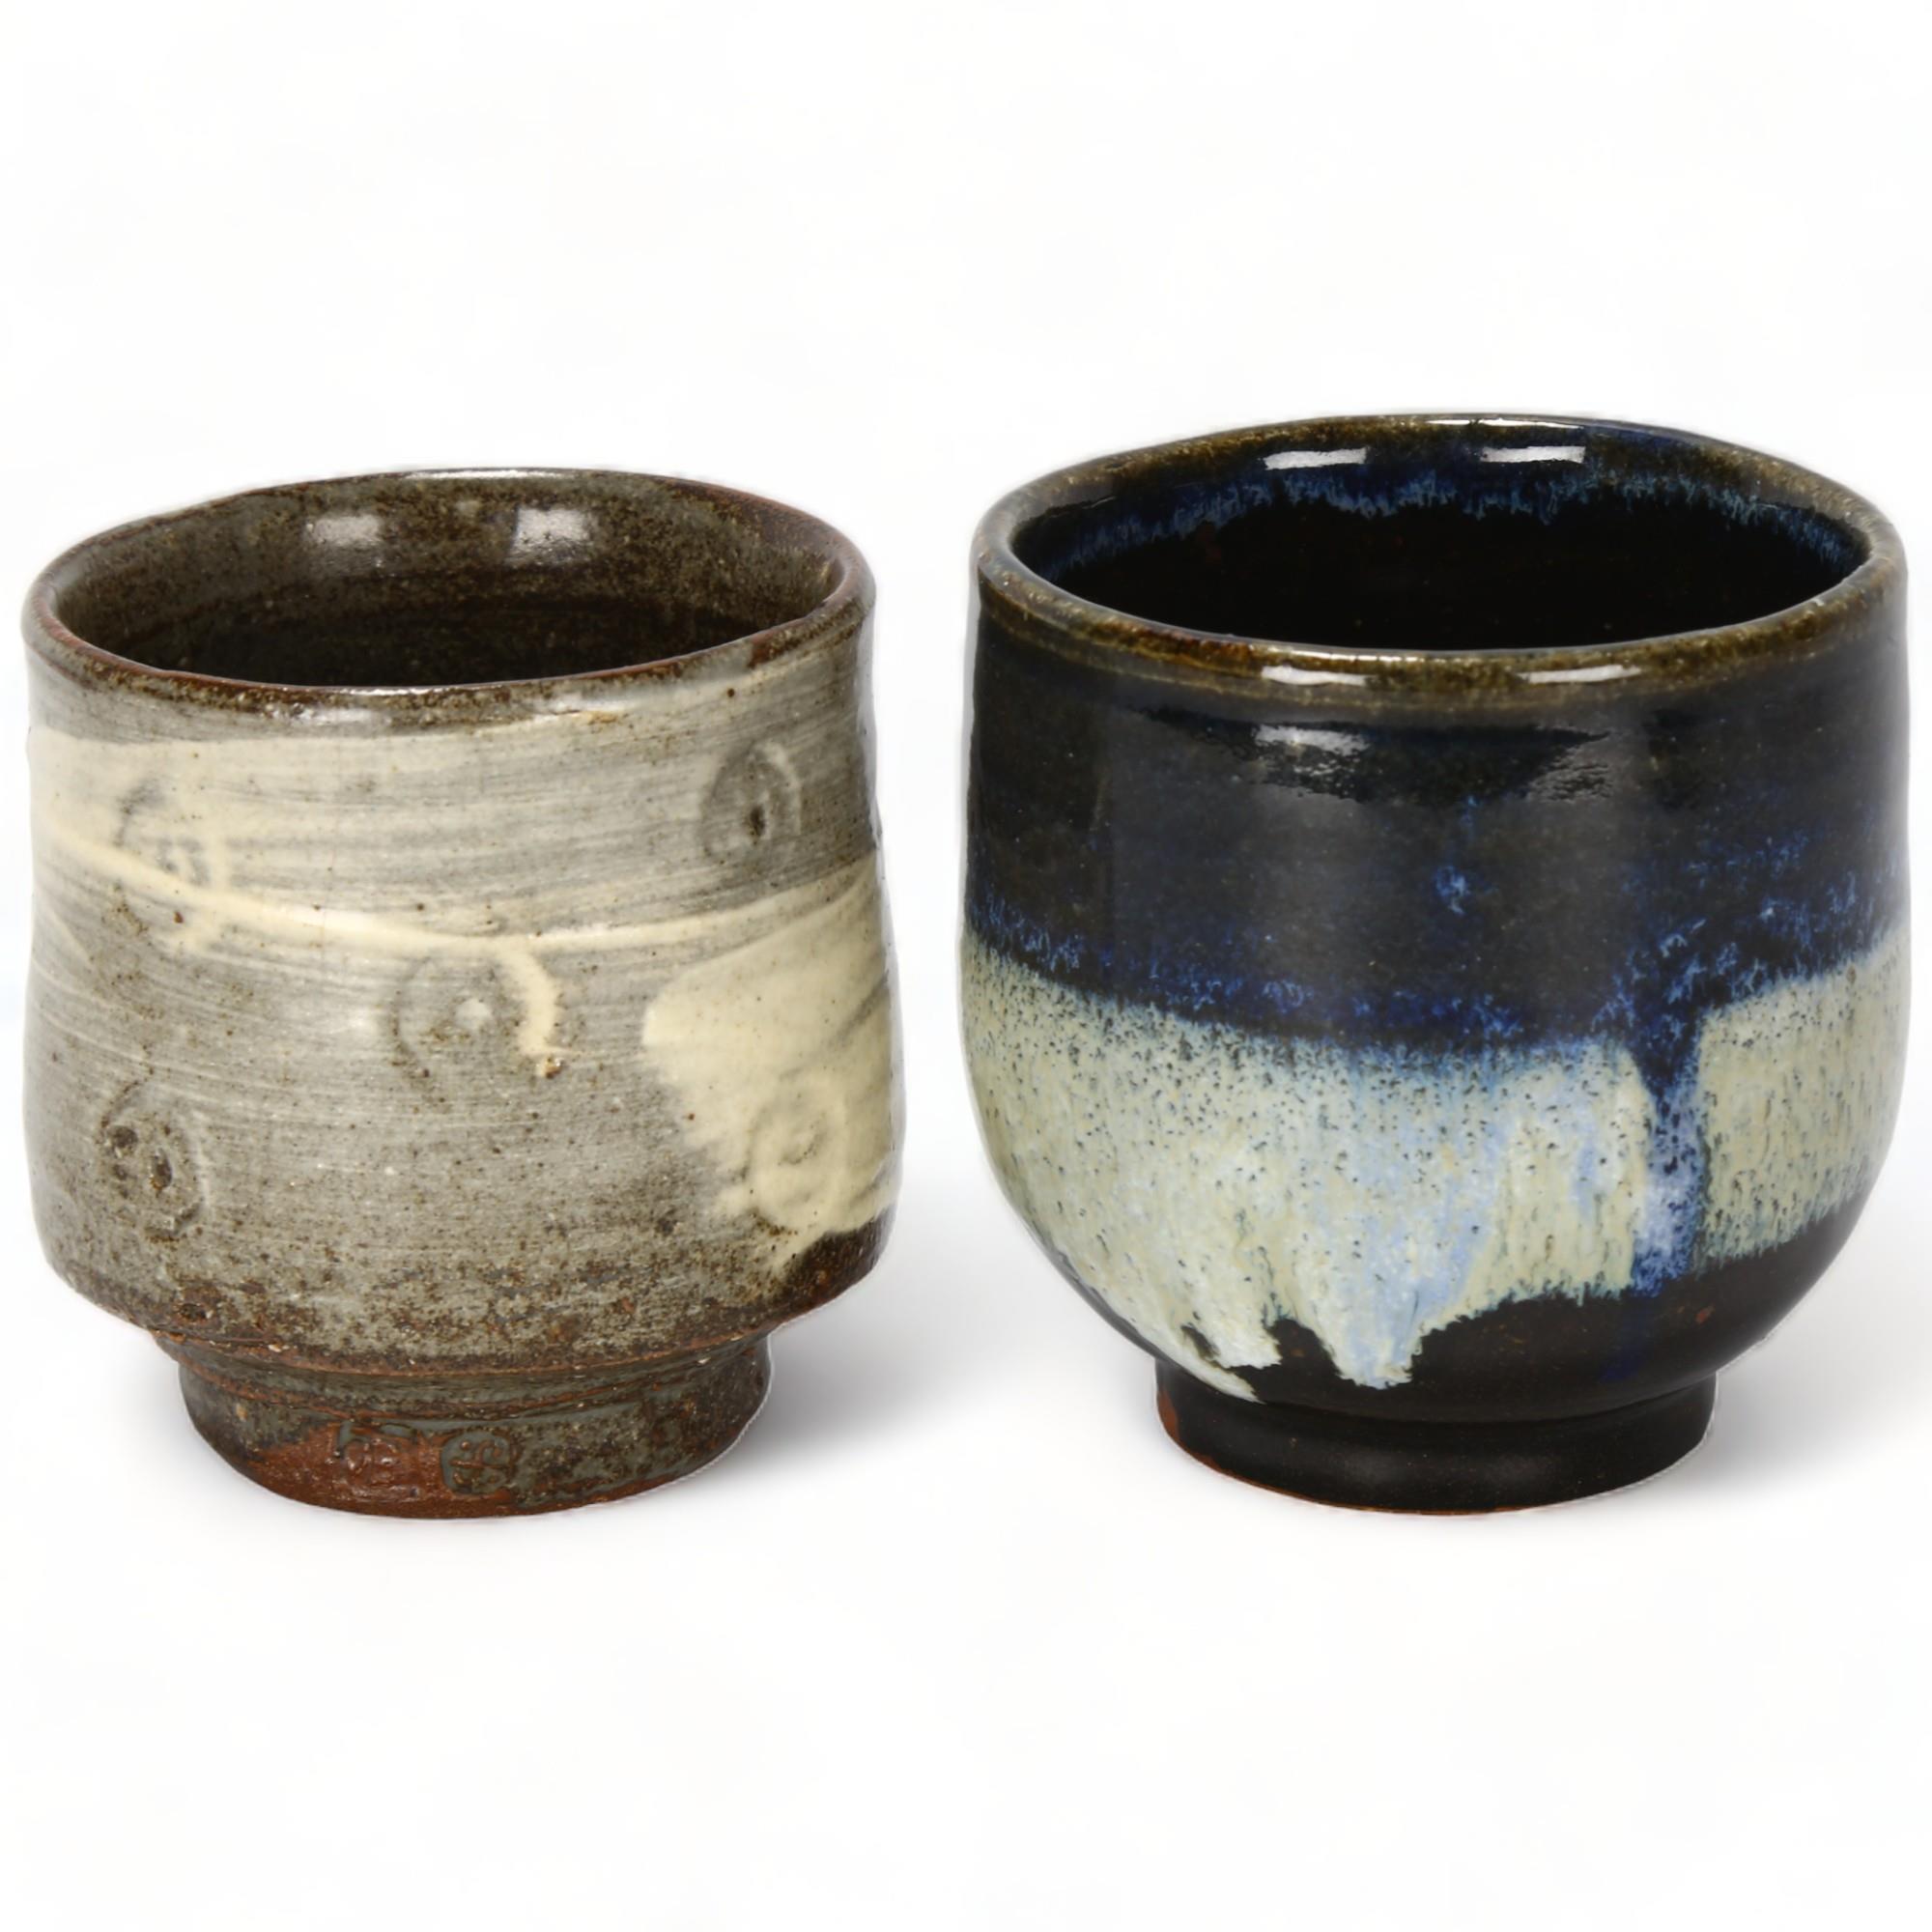 Leach Pottery, St Ives, 2 Yunomi / tea bowls, TREVOR CORSER and JOHN BEDDING, makers stamp and